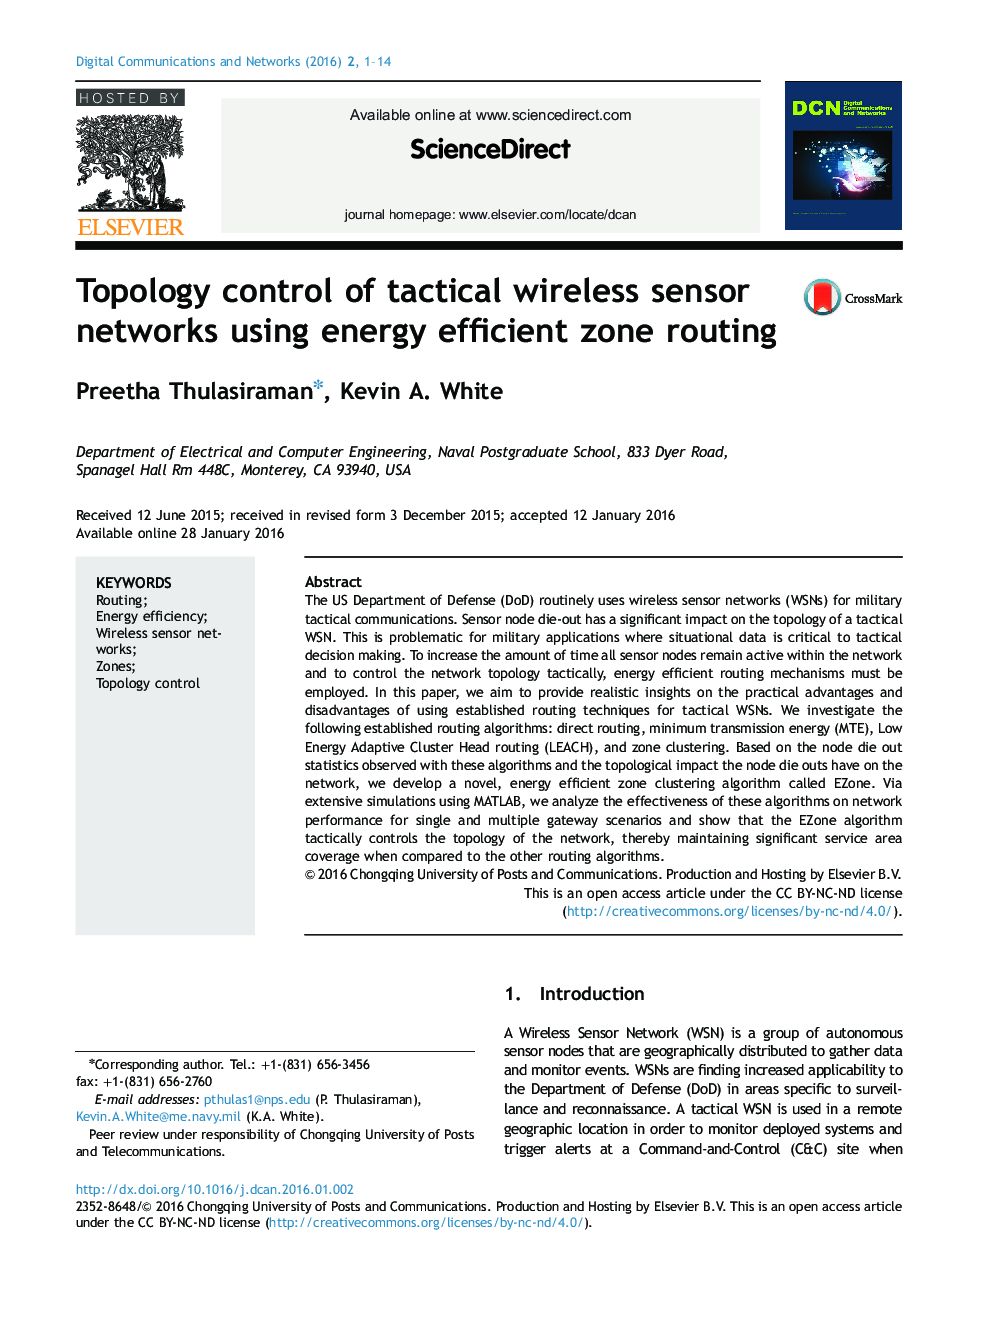 Topology control of tactical wireless sensor networks using energy efficient zone routing 